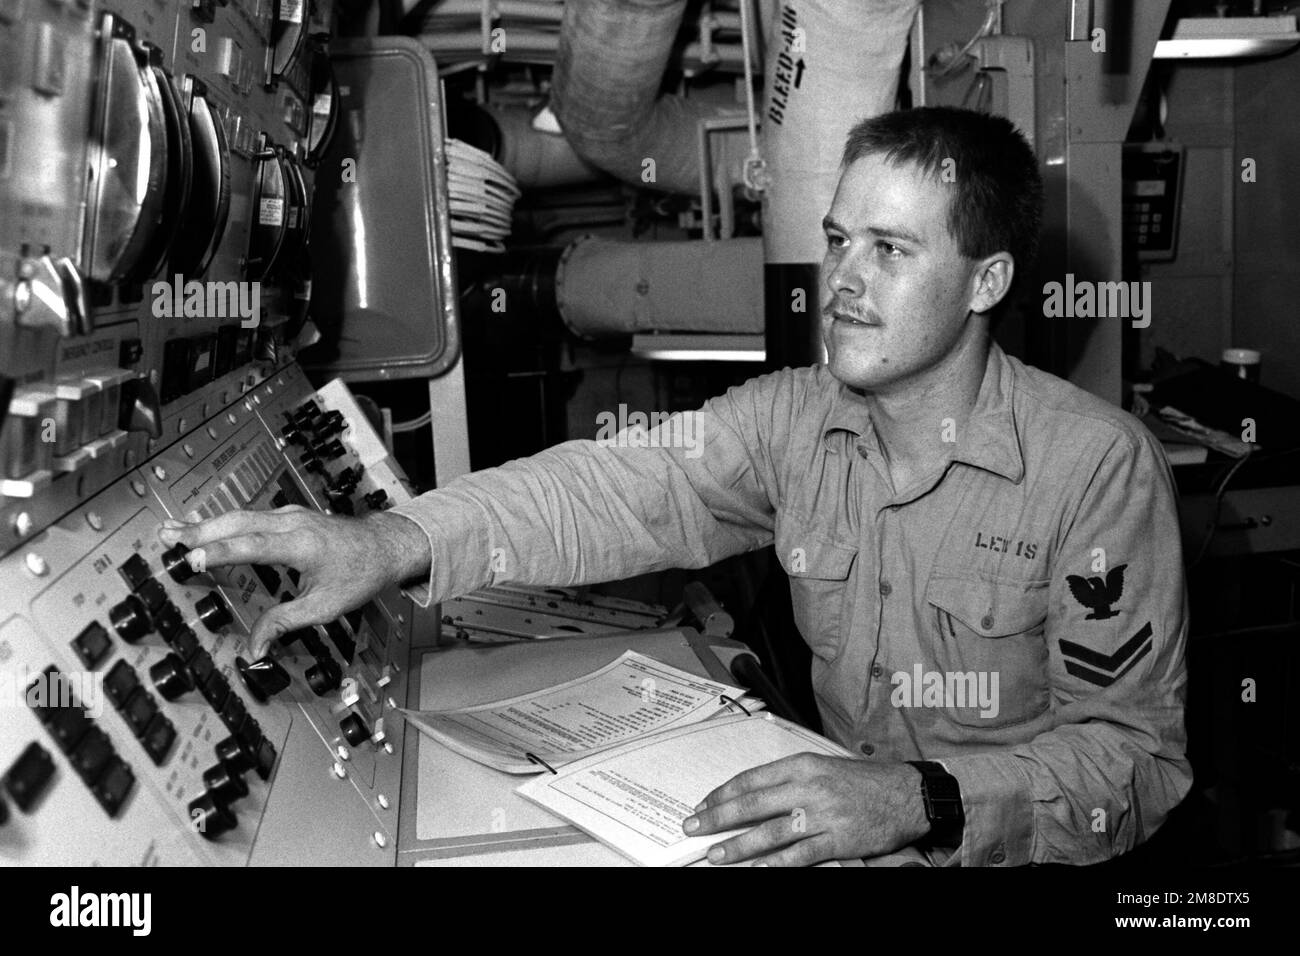 Gas Turbine Systems Technician E (Electrical) 2nd Class David Lewis stands watch at a console in central control aboard the guided cruiser USS CHANCELLORSVILLE (CG 62). Country: Unknown Stock Photo